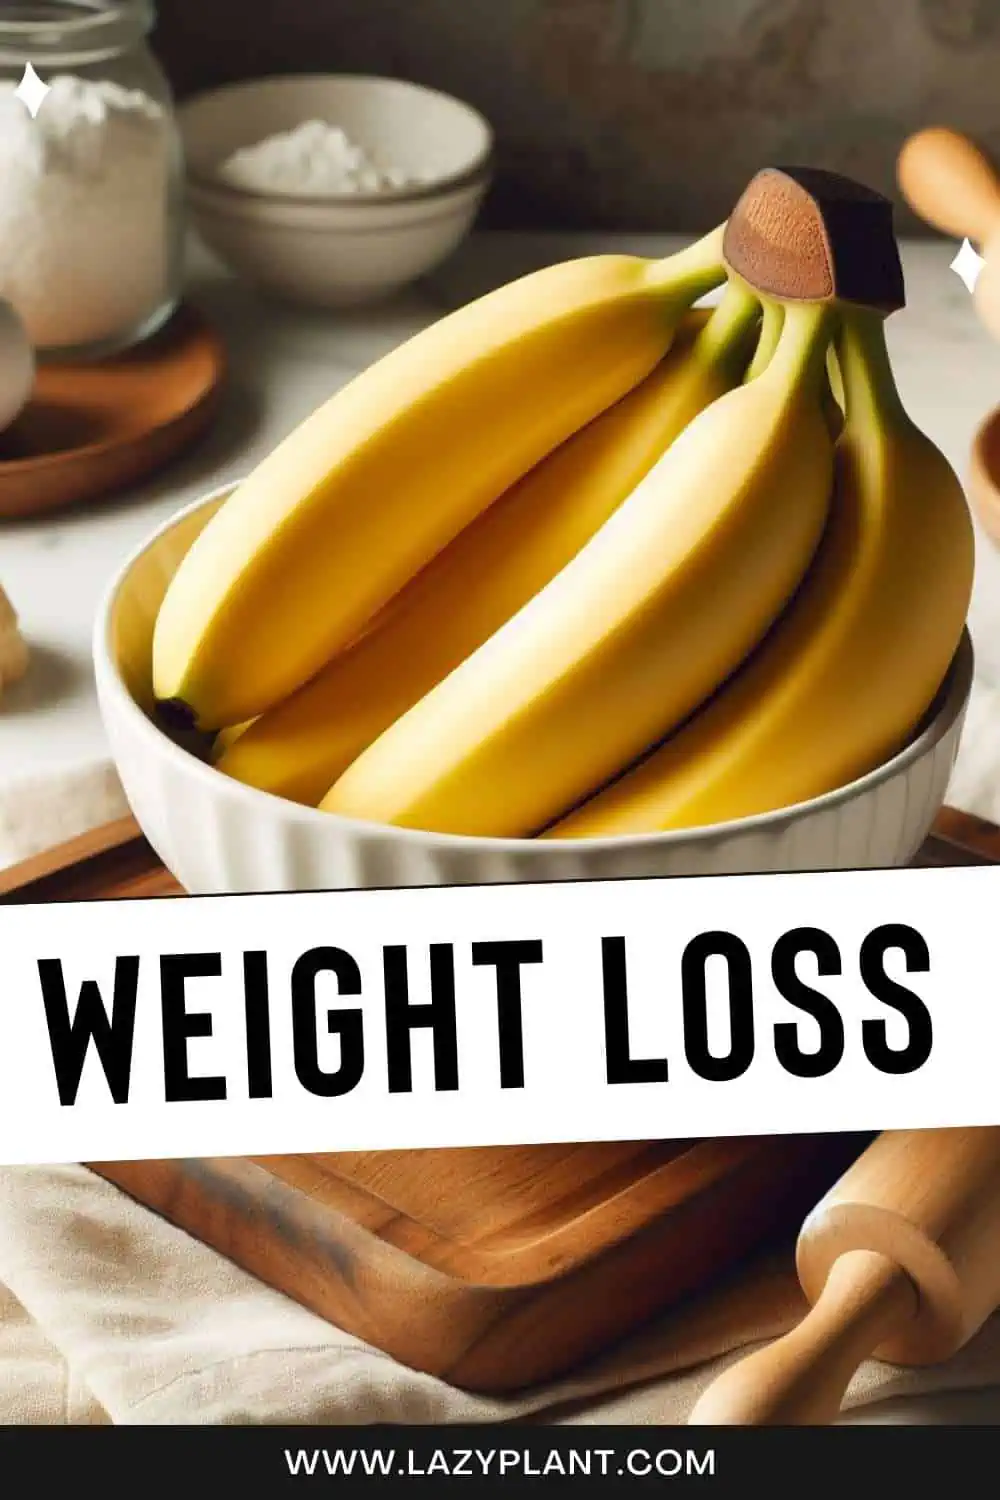 Eat bananas for Weight Loss